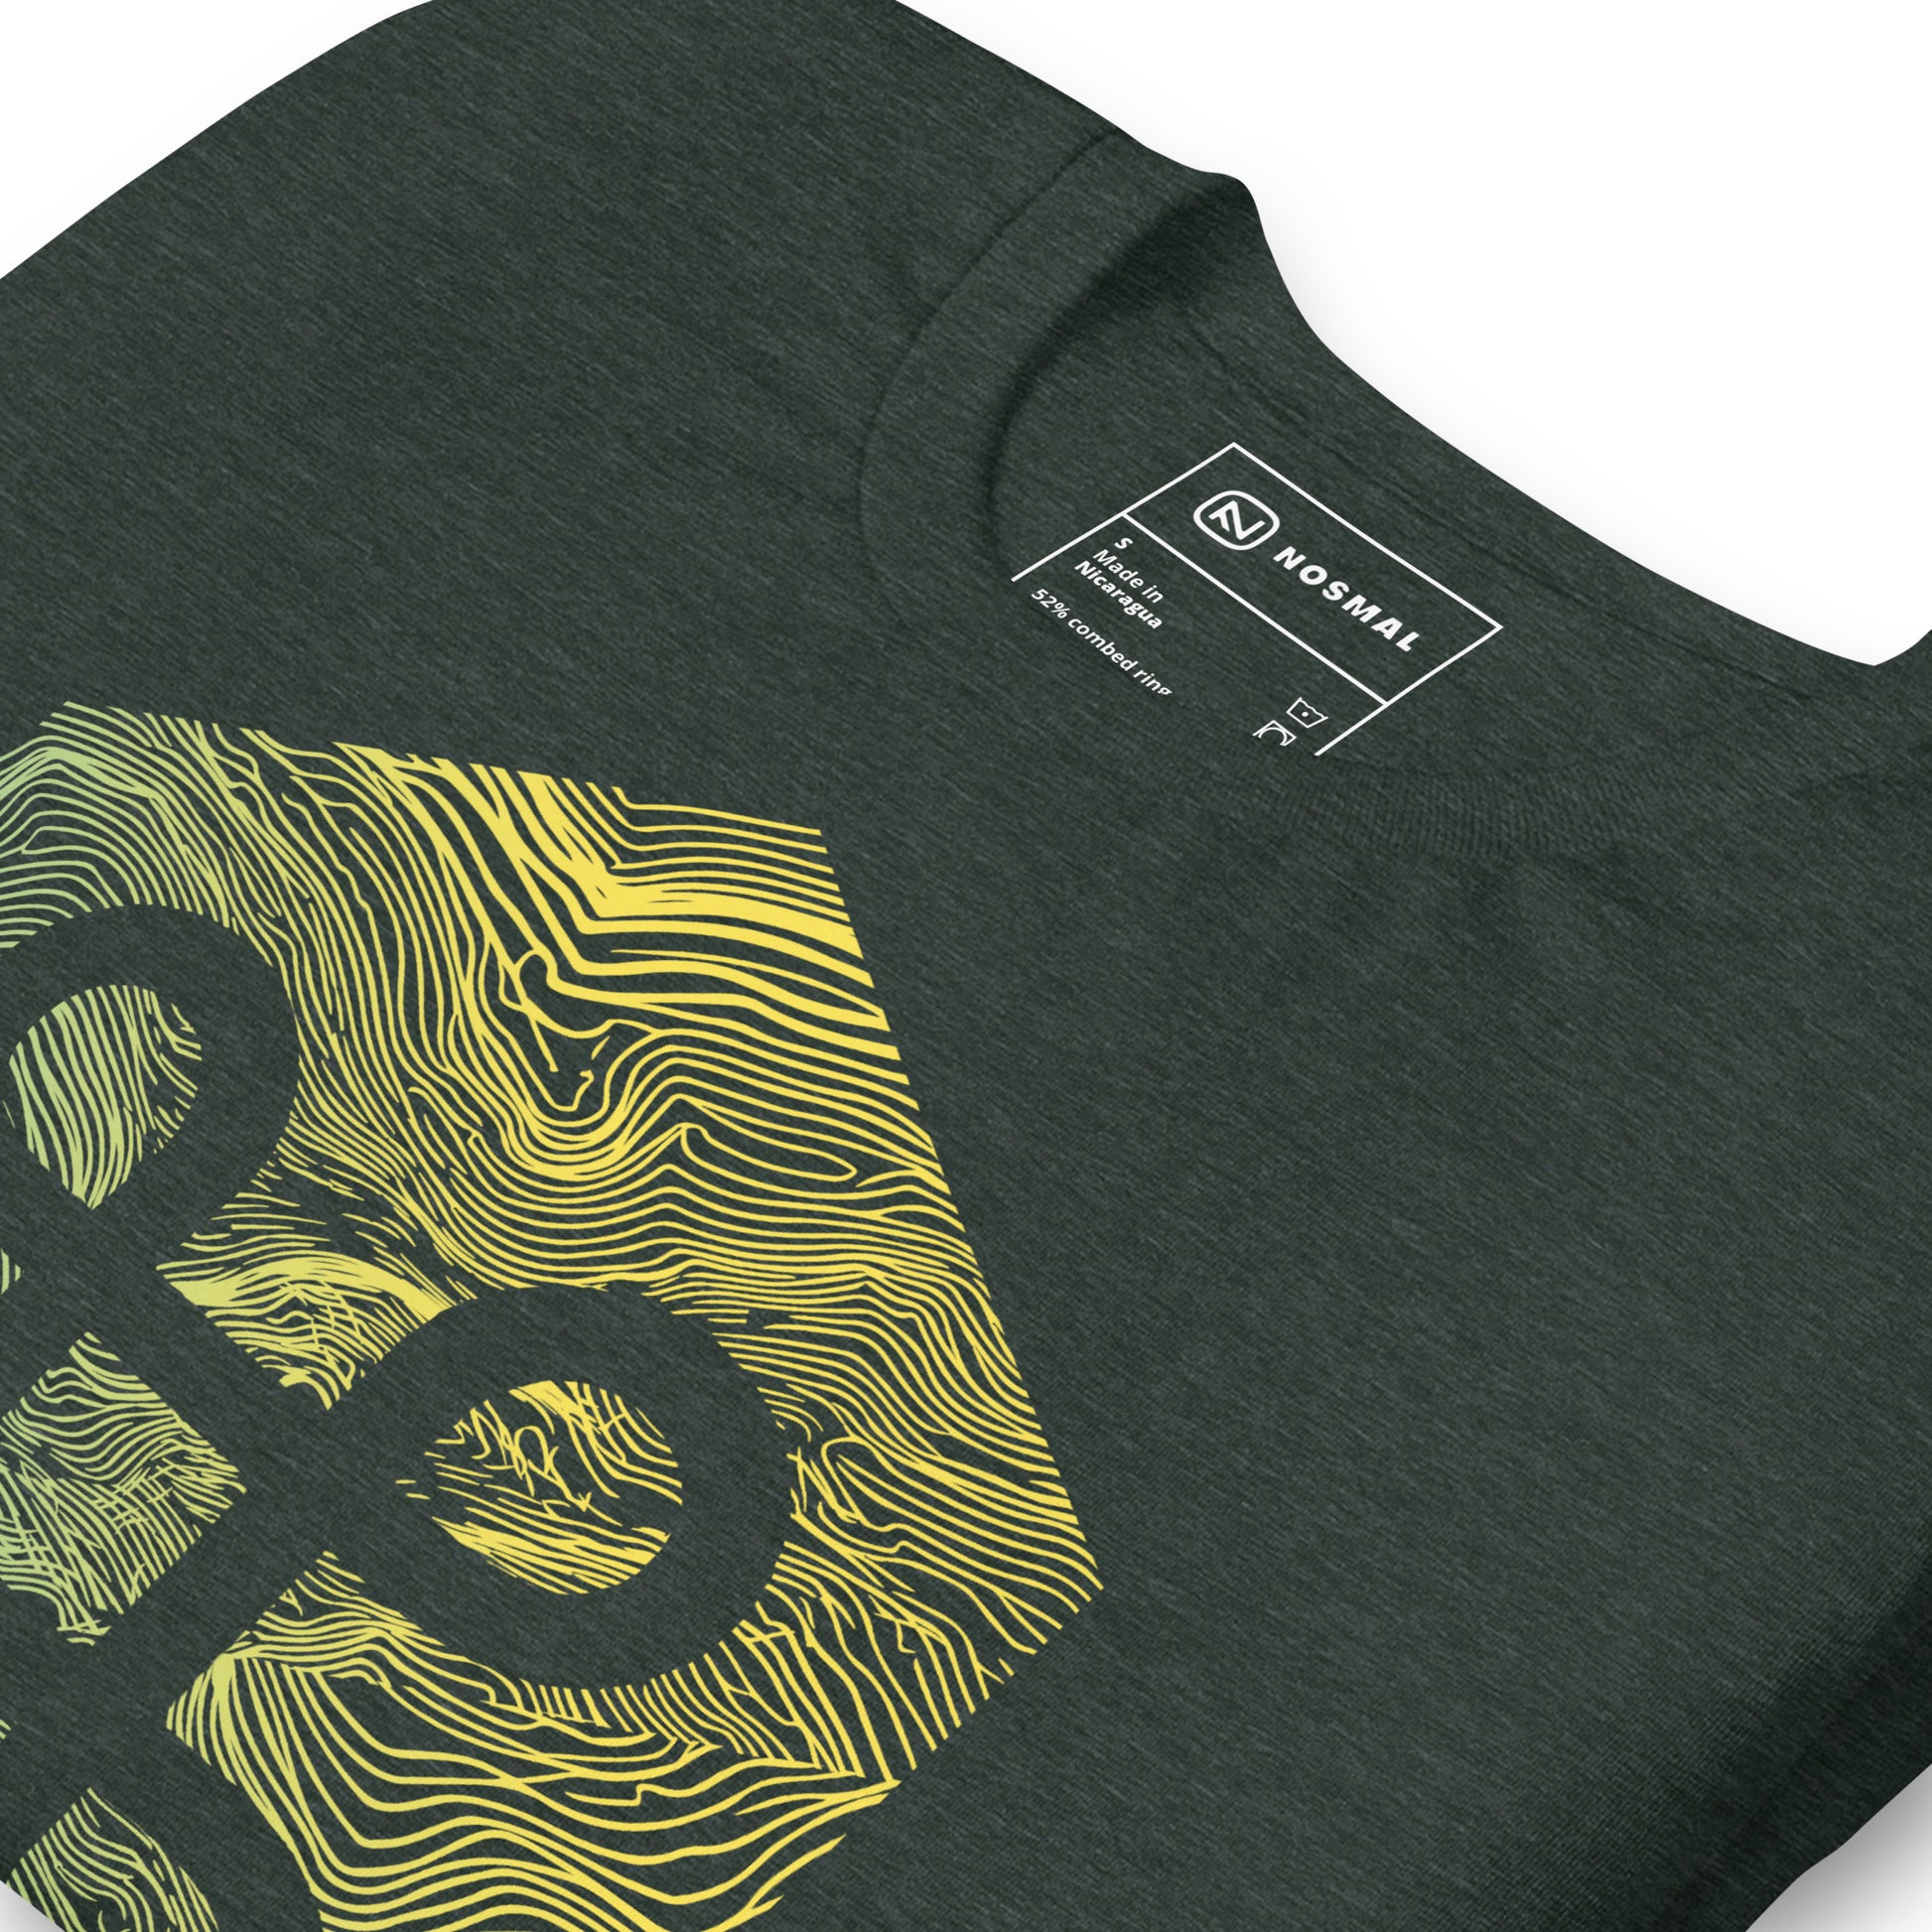 Angled close up shot of the commander gradient design on heather forest unisex t-shirt.